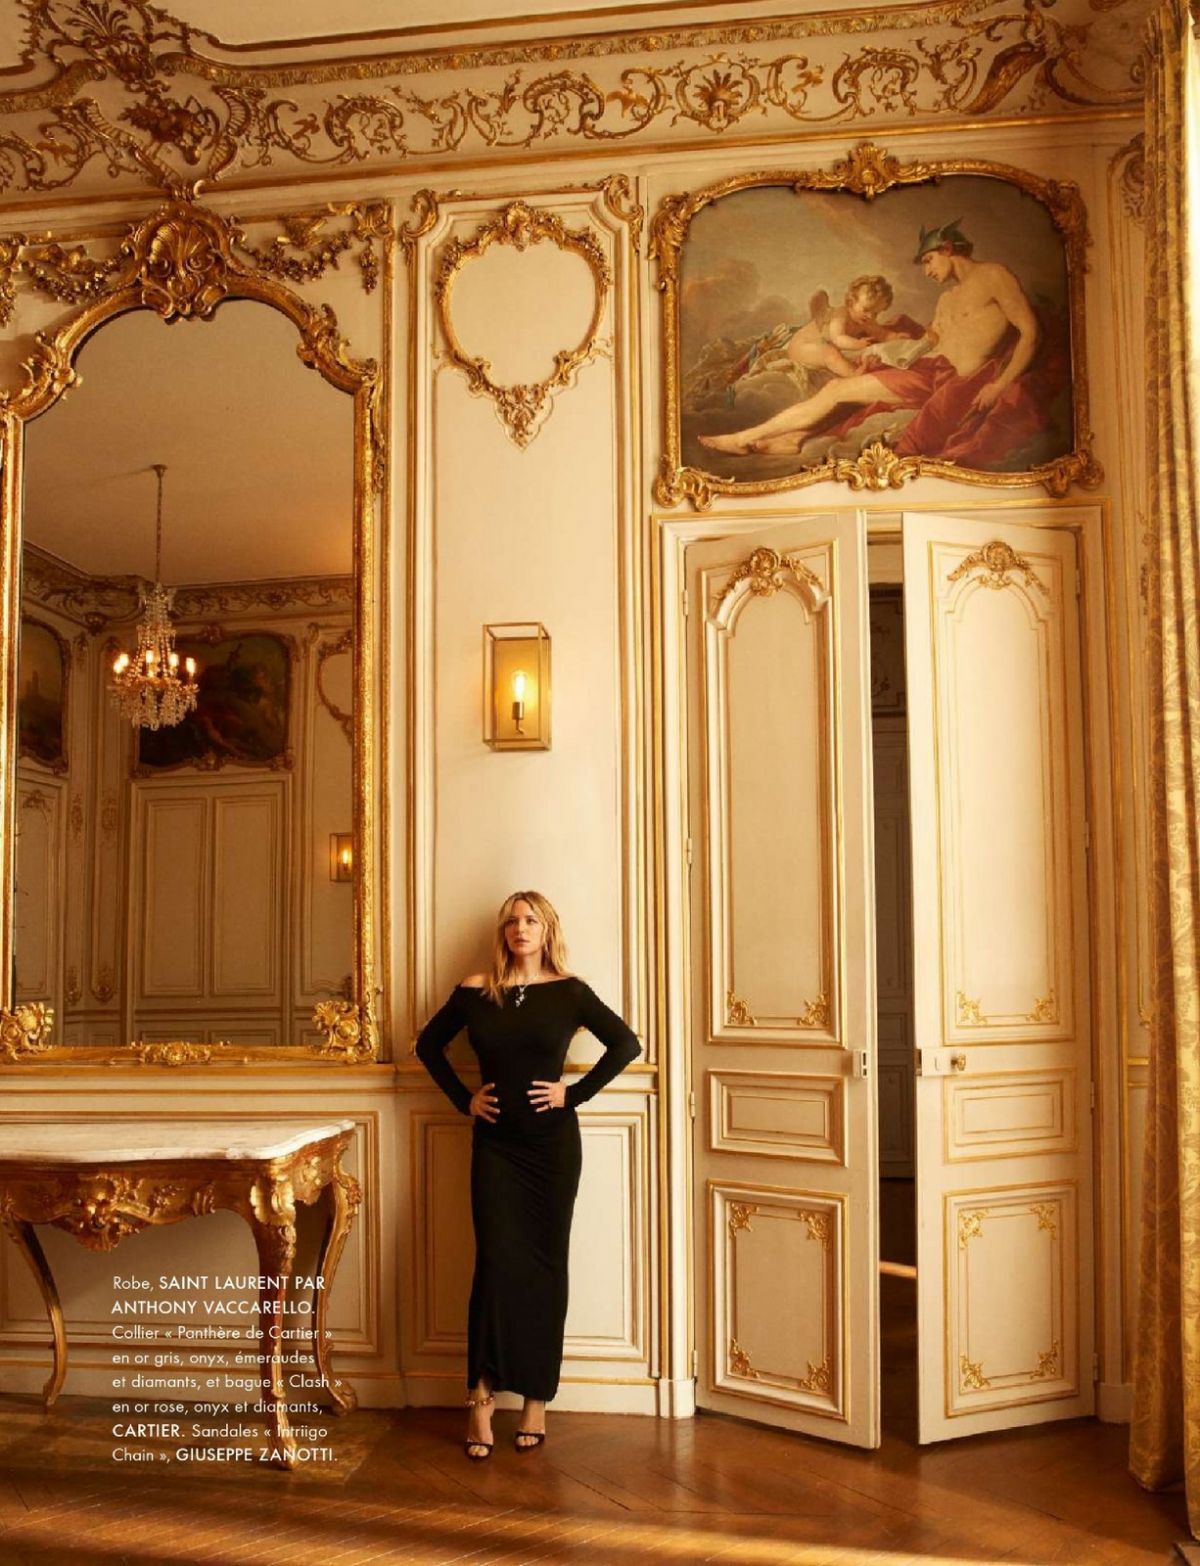 Elegant and bold style of Virginie Efira in Elle Magazine